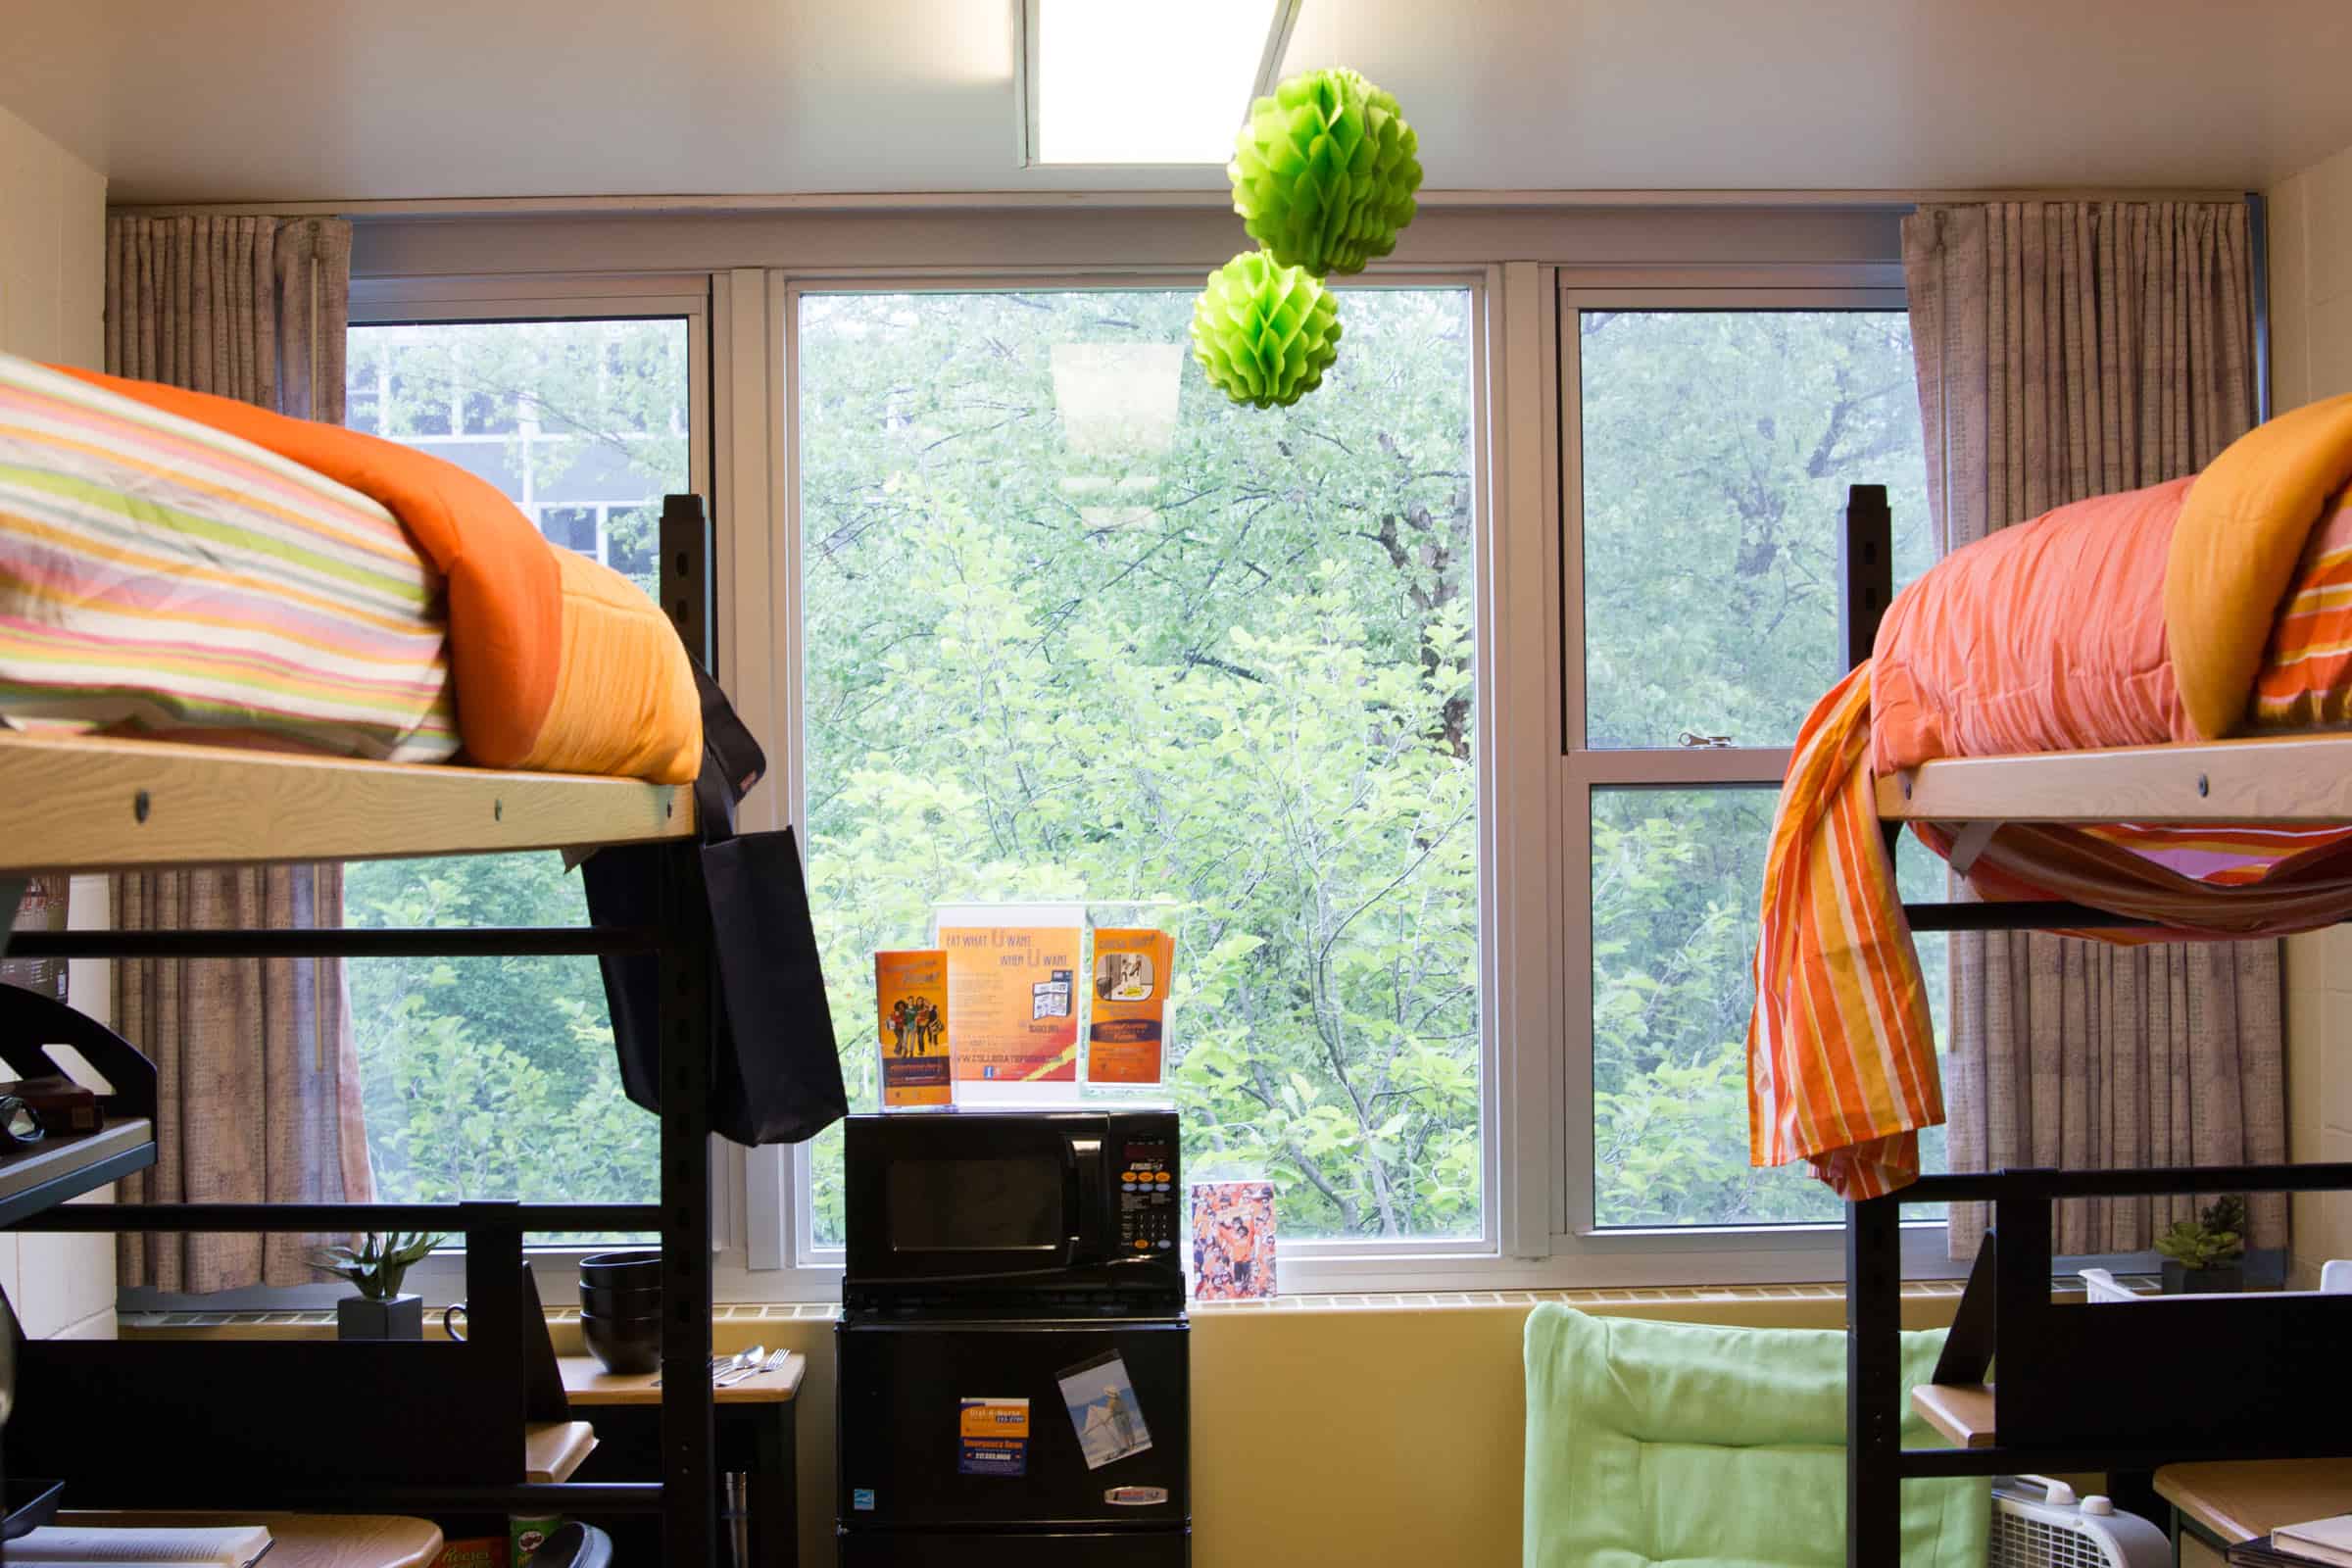 Pros and Cons of Living In a College Dorm